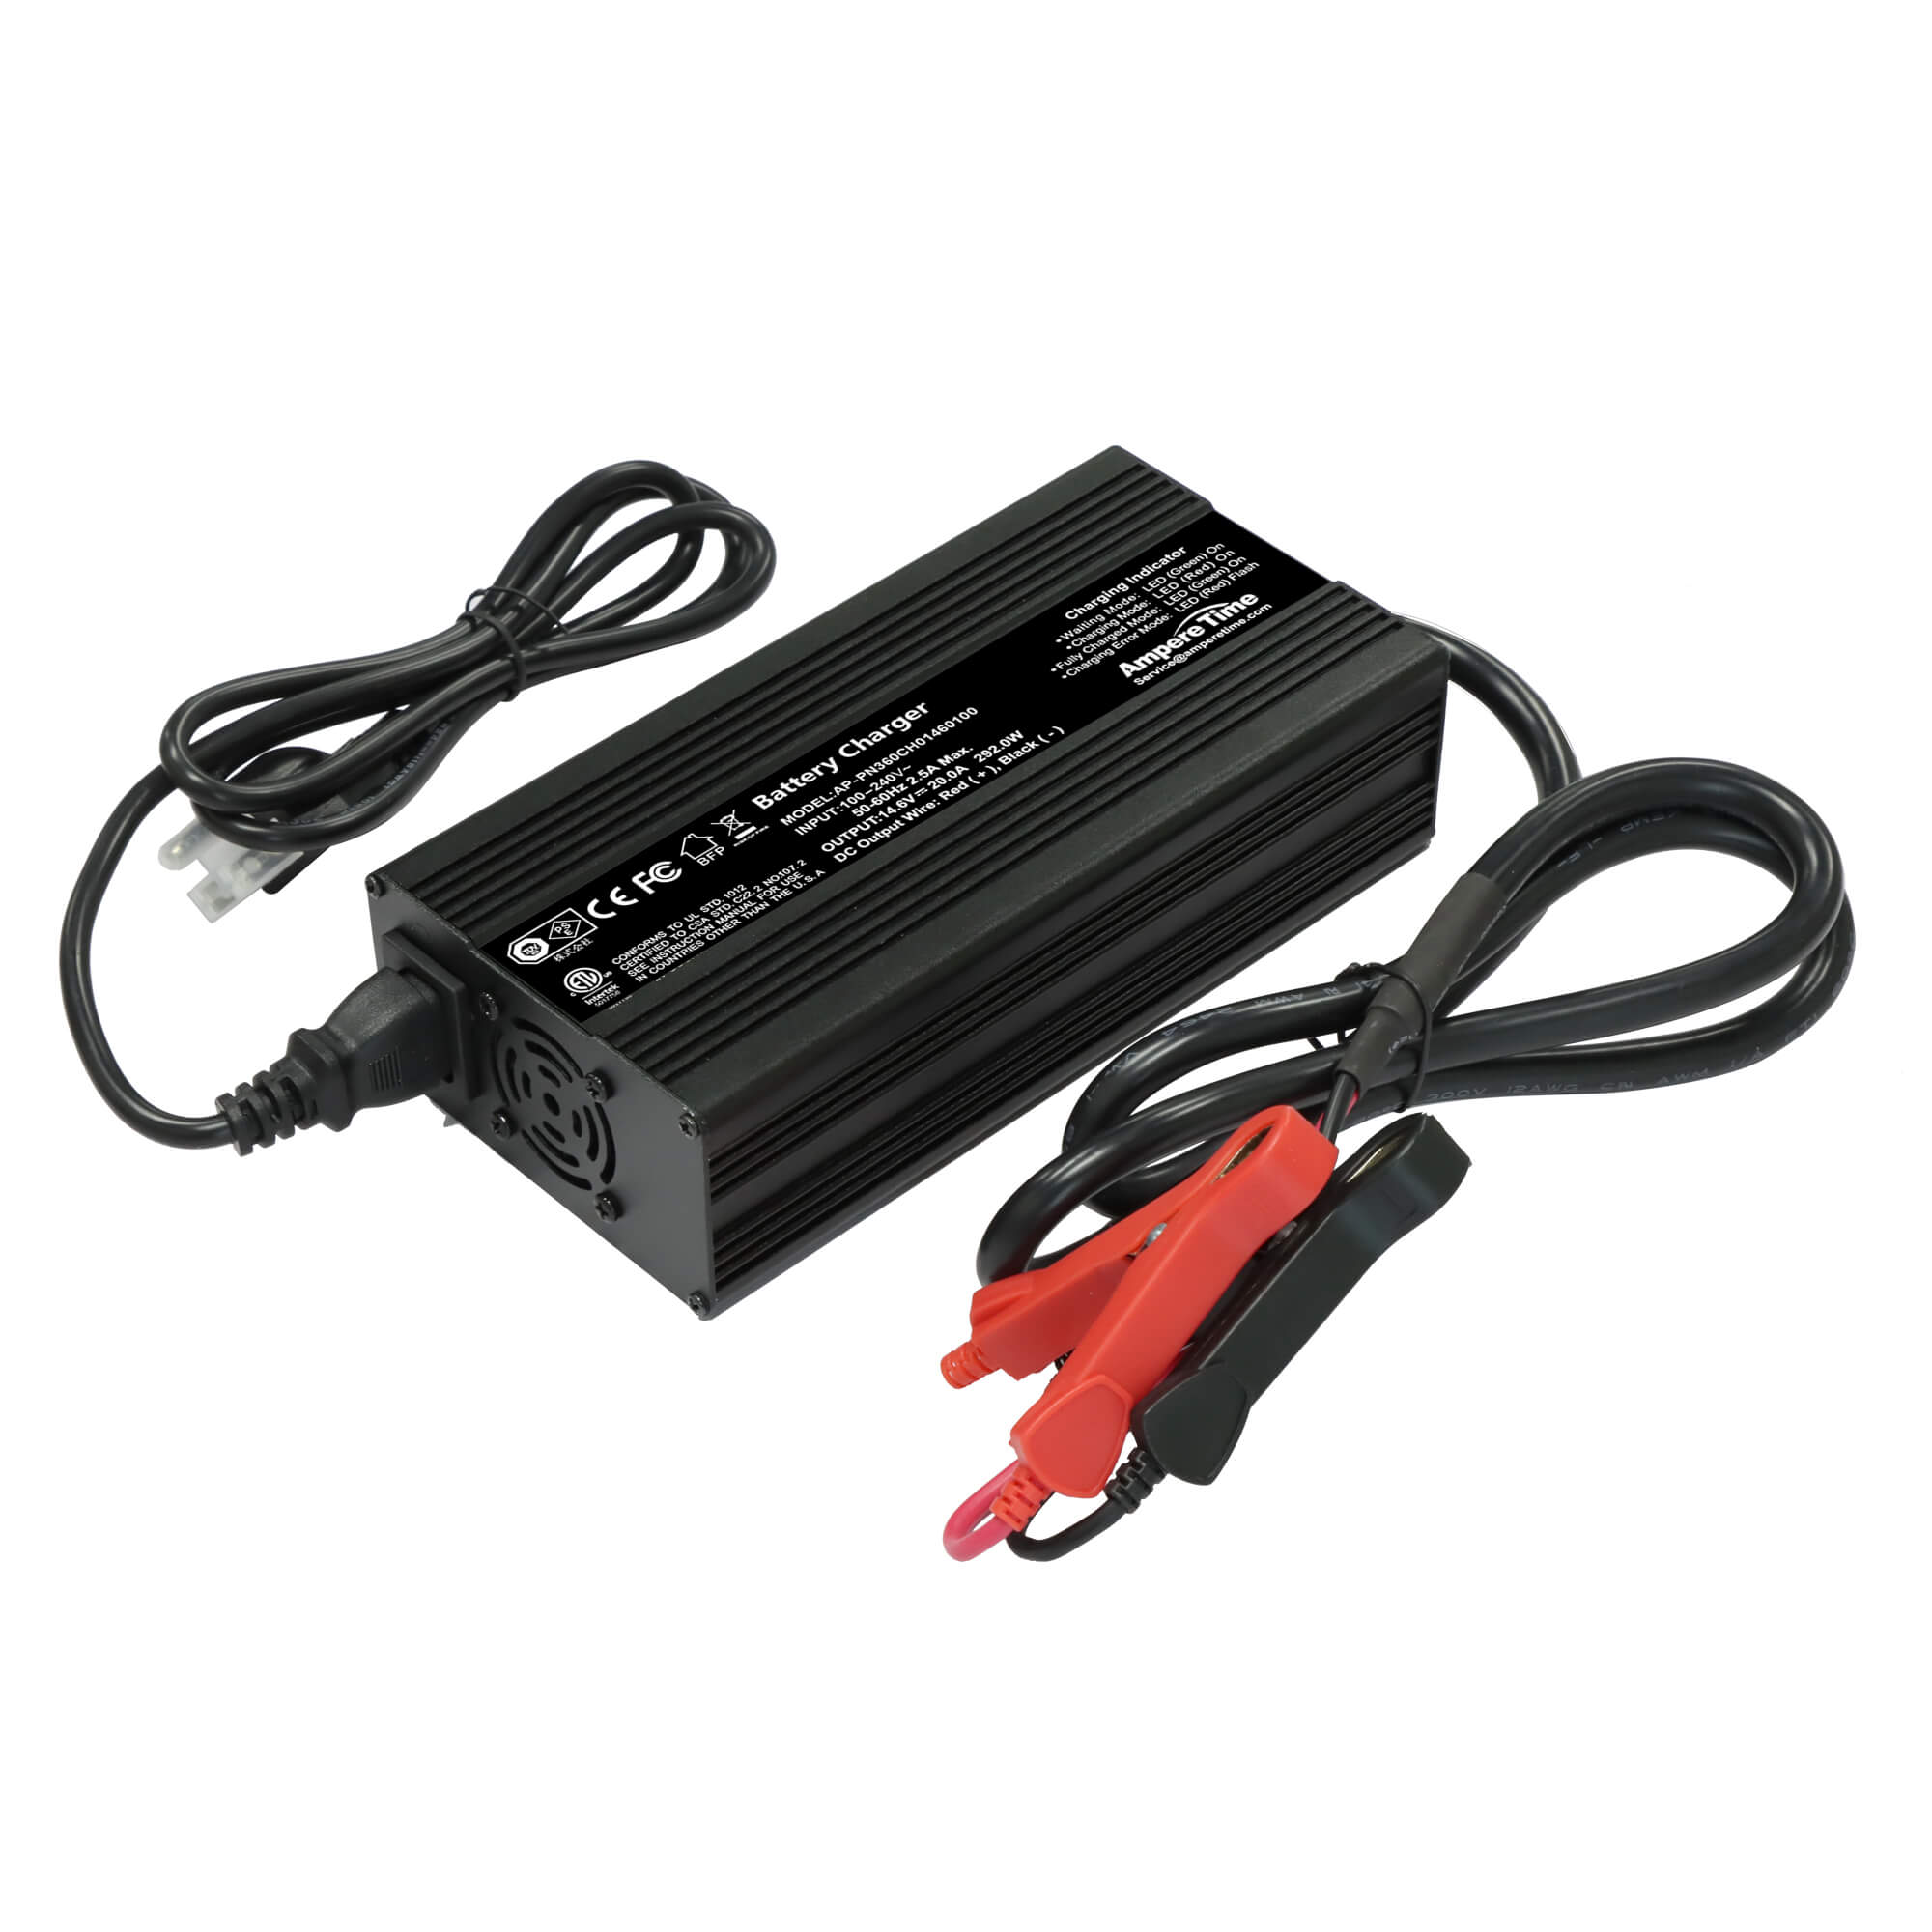 Ampere Time Stable Voltage 14.6V 20A Lithium Iron Phosphate Battery Charger Ampere Time